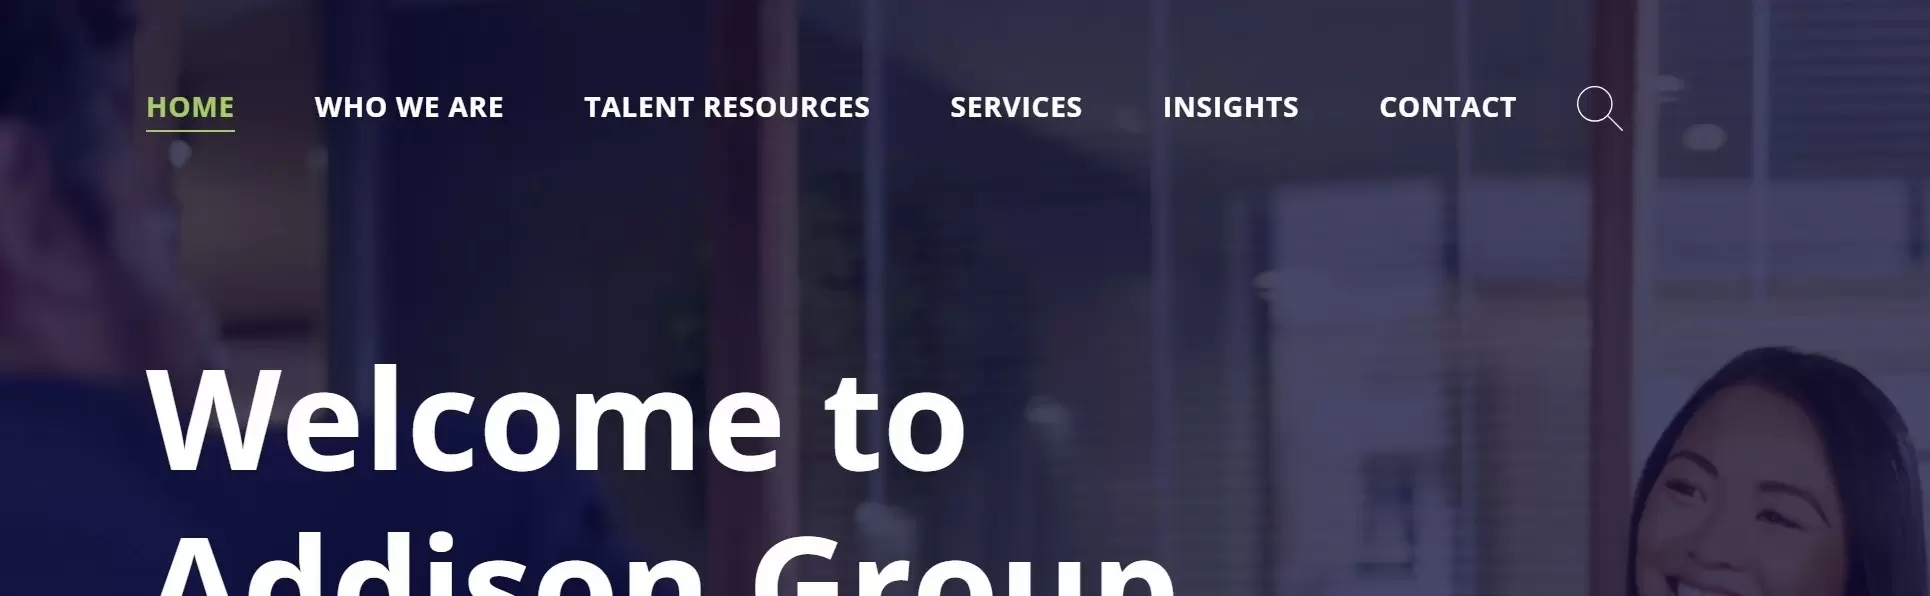 Addison Group company profile and reviews